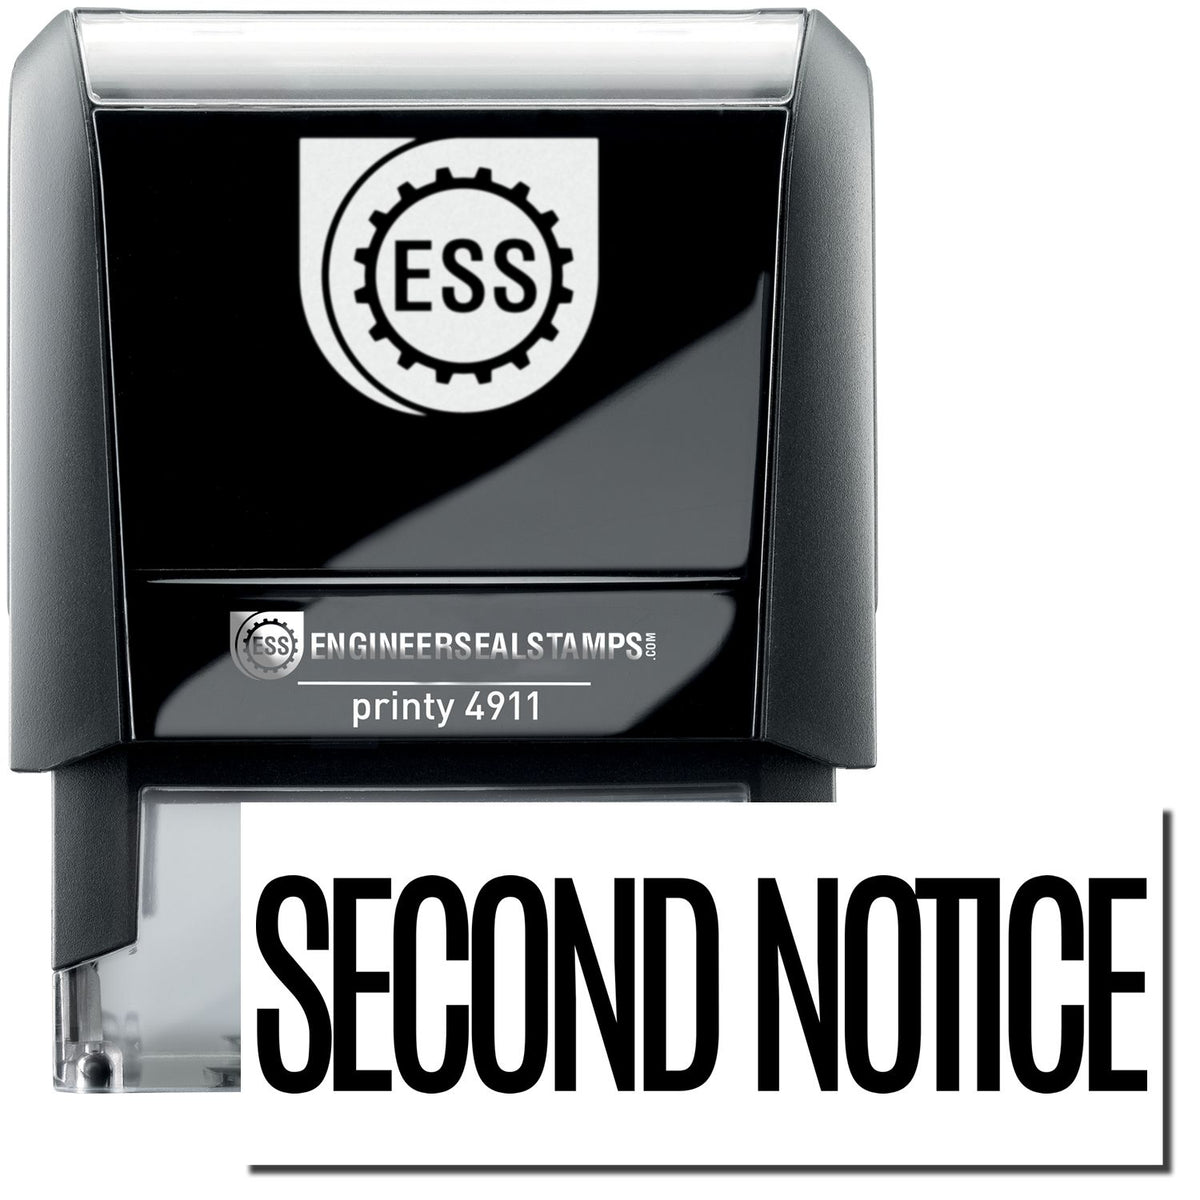 A self-inking stamp with a stamped image showing how the text &quot;SECOND NOTICE&quot; in a narrow font is displayed after stamping.